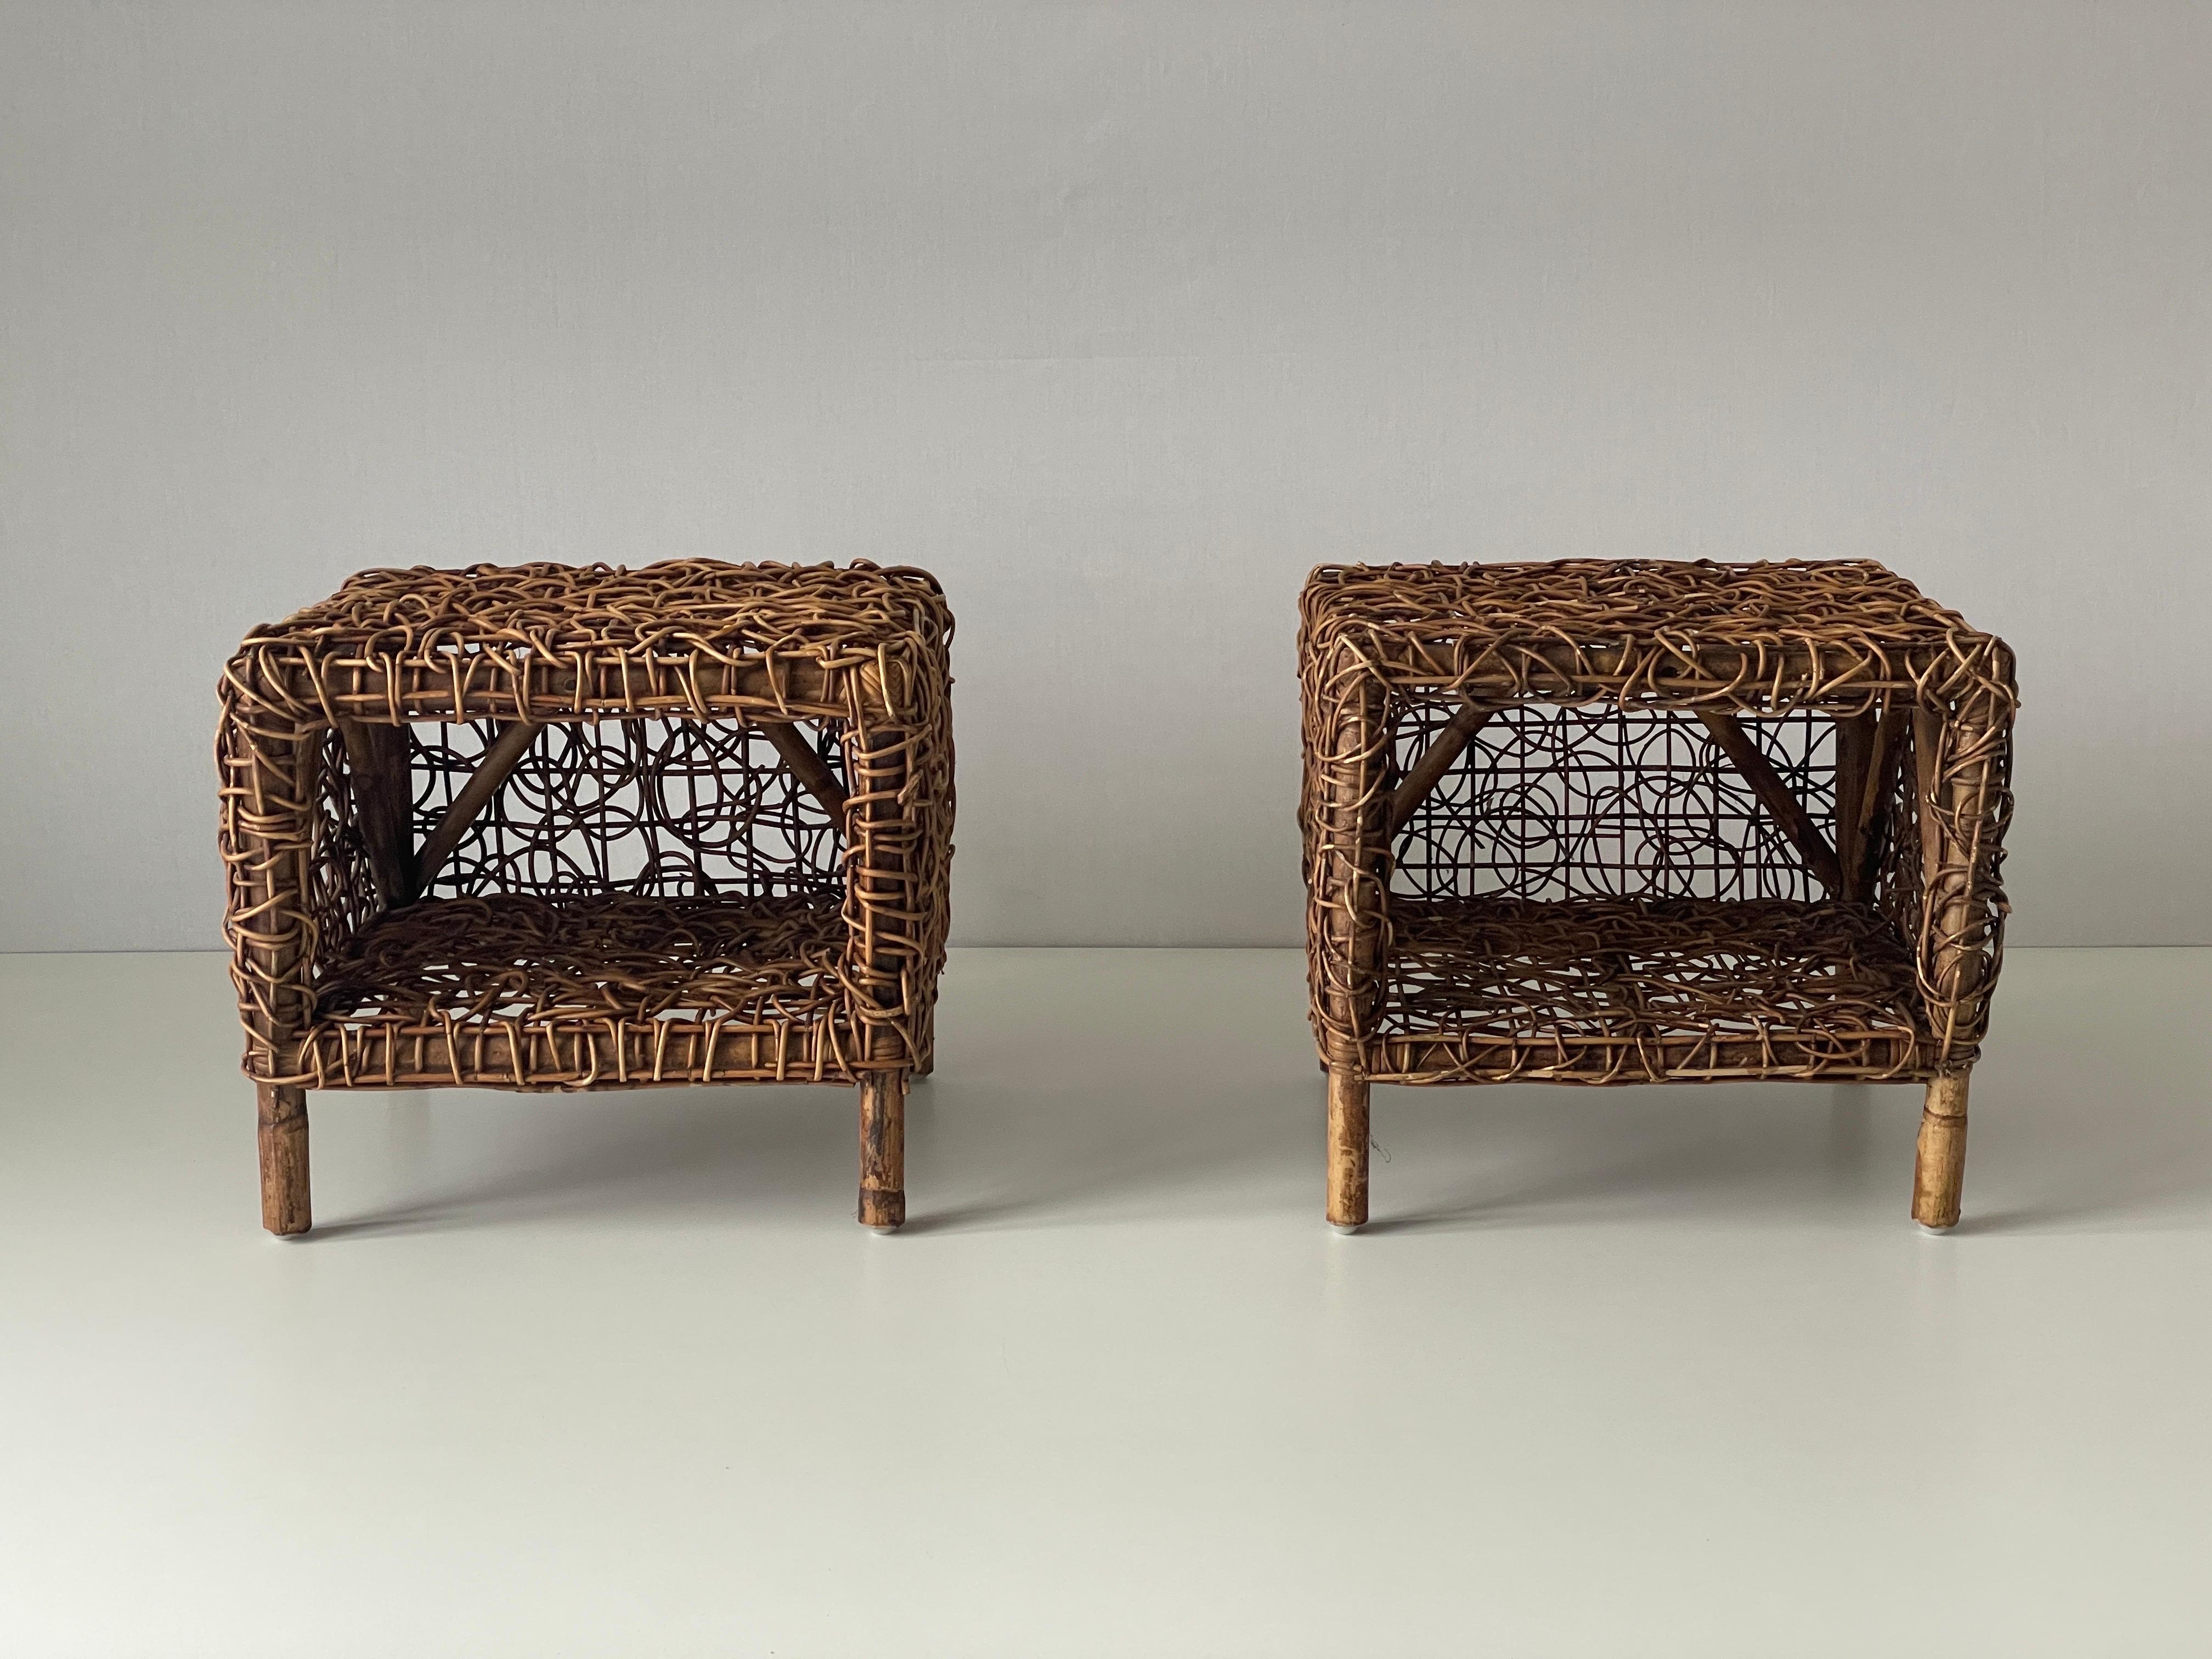 Unusual Design Woven Bamboo Pair of Bedside Tables, 1960s, Italy

No damage, no crack.
Wear consistent with age and use.

Measurements: 
Height: 40 cm
Width: 46 cm
Depth: 41 cm